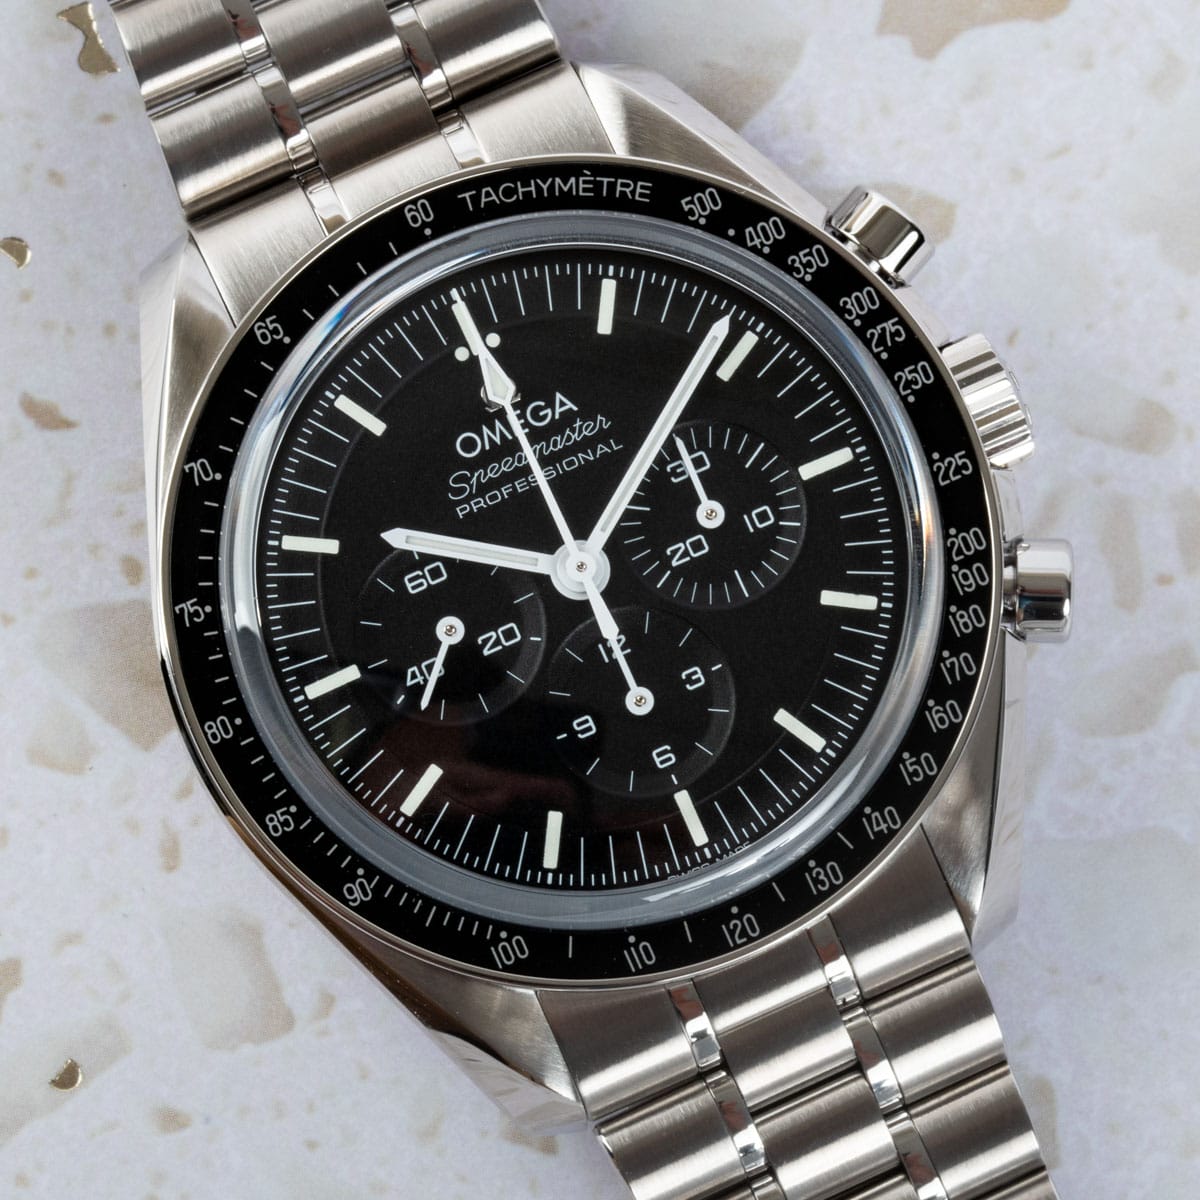 Stylied photo of  of Speedmaster Moonwatch Professional Co-Axial Master Chronometer